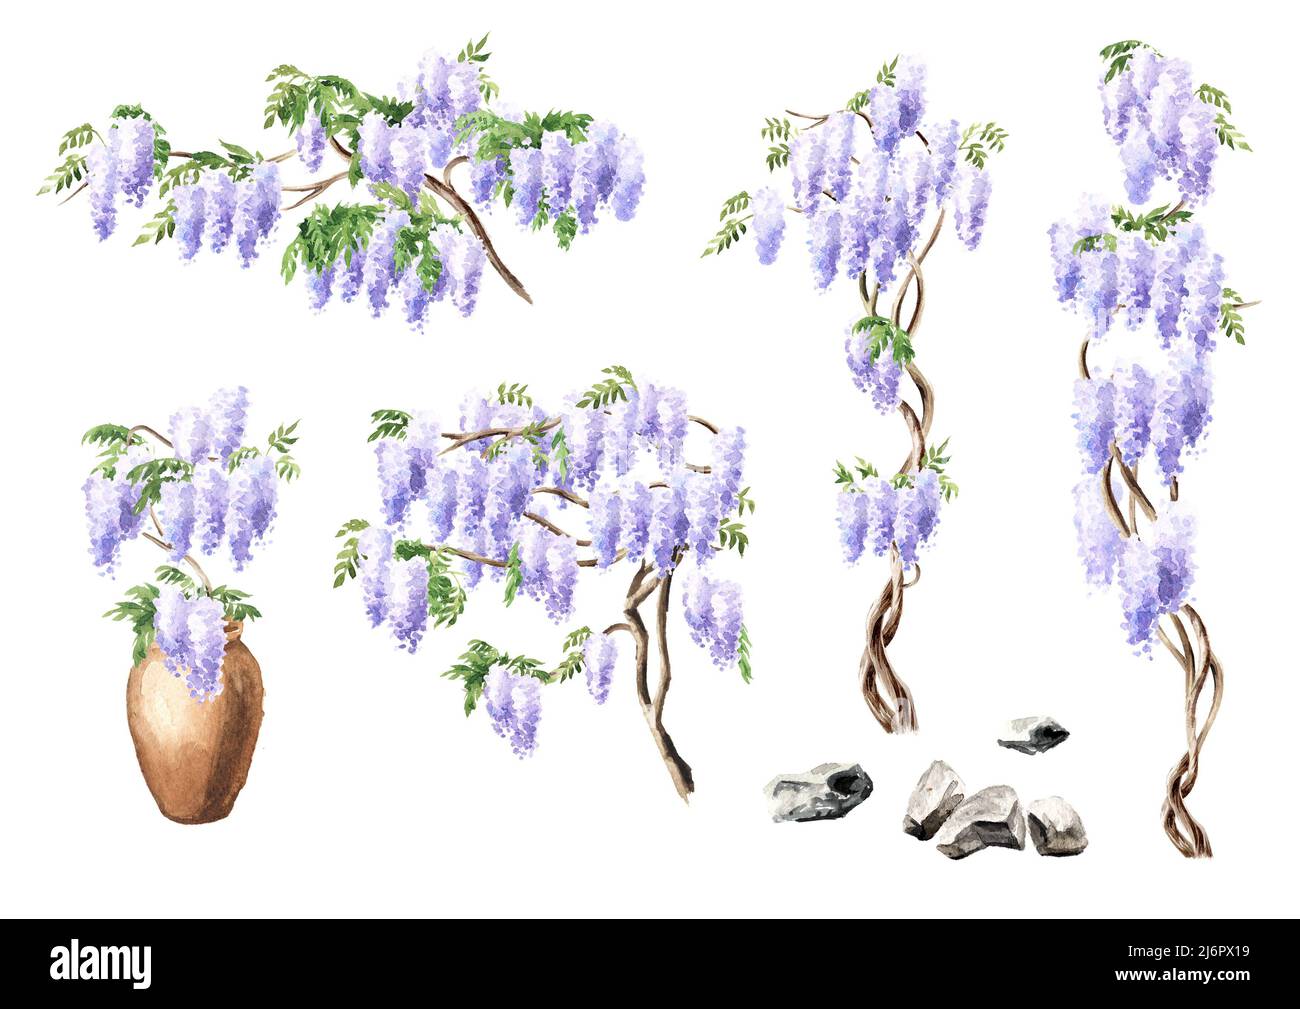 Wisteria blossom tree elements set.  Hand drawn watercolor  illustration isolated on white background Stock Photo